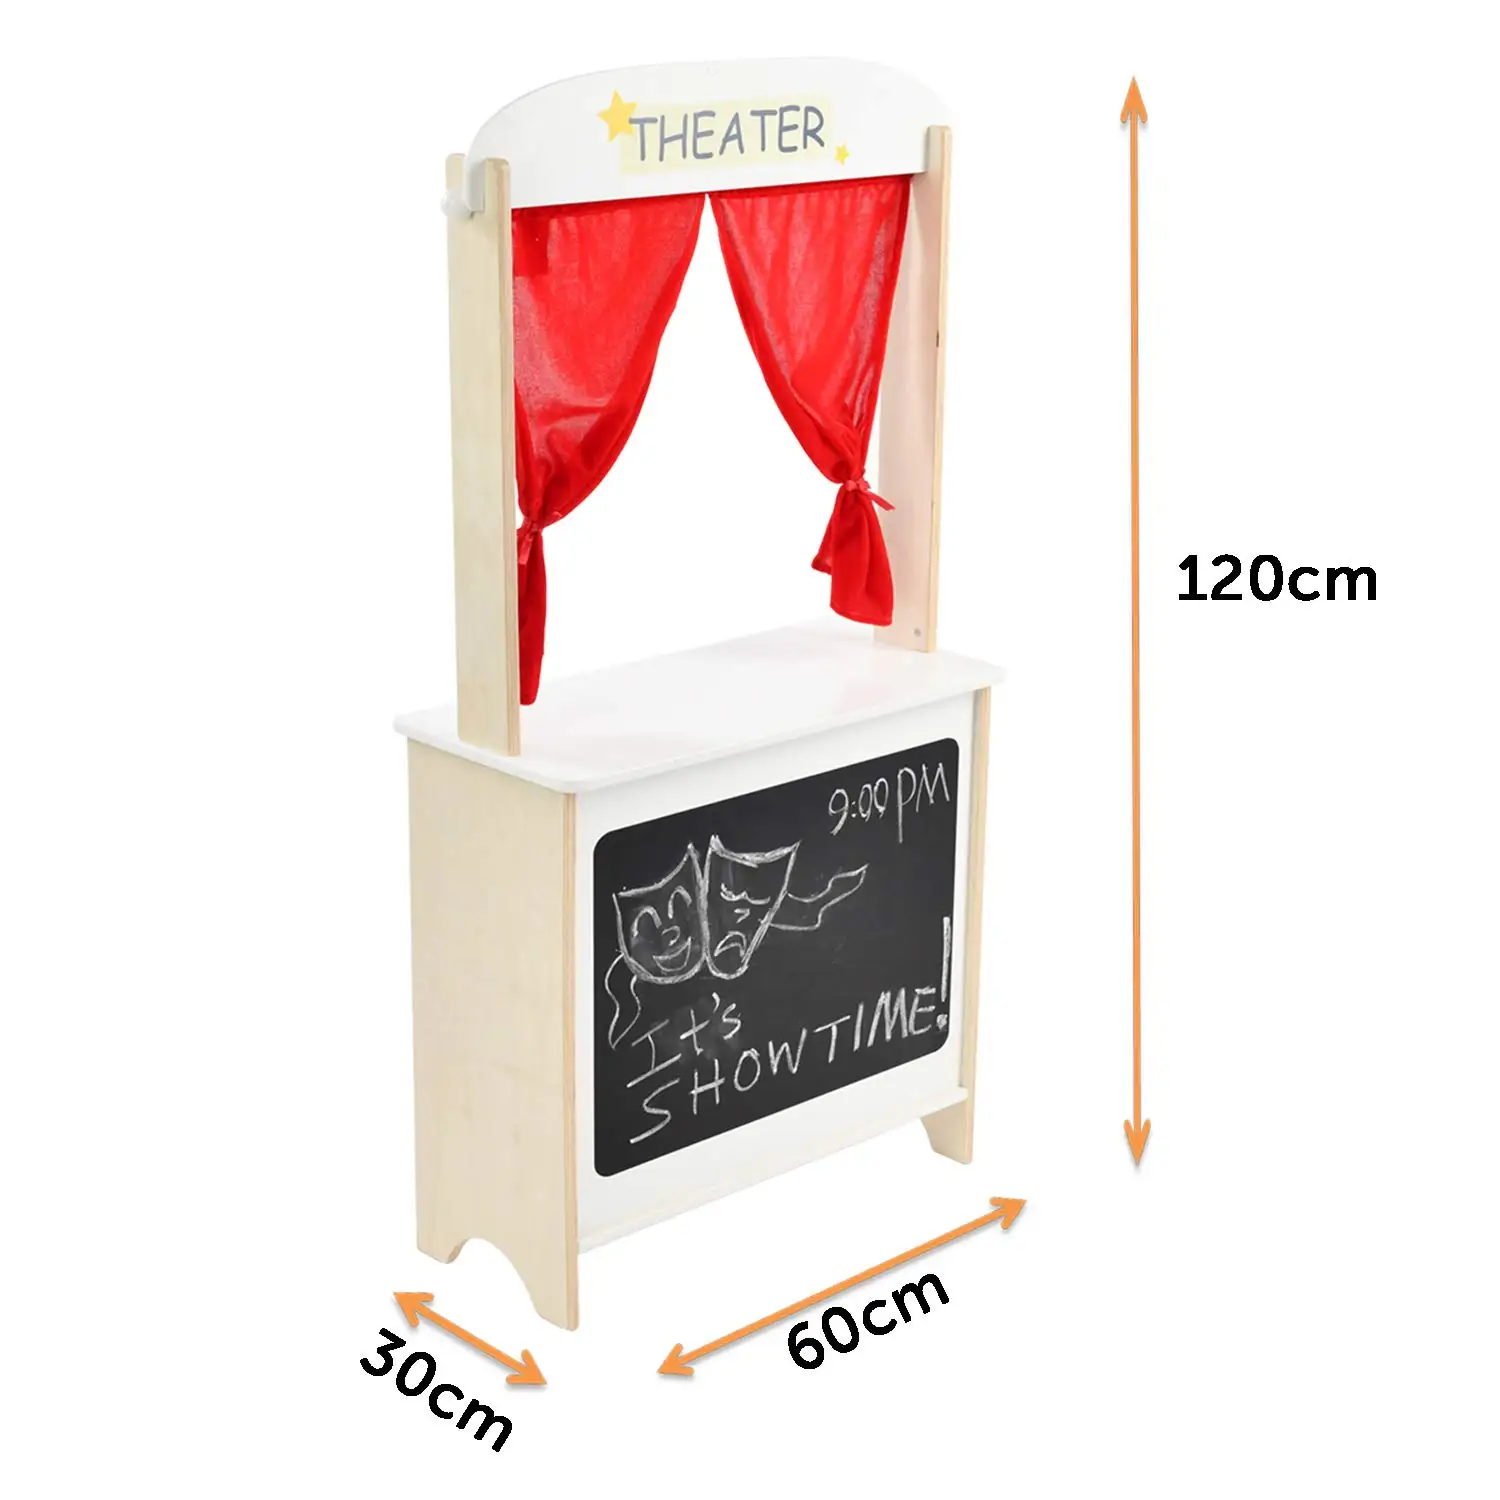 Wooden Puppet Theater Stand with 2 Hand Puppets Chalkboard, Double-Sided Shop Stand & Stage Puppet Show Theater for Kids, Deluxe Children Puppet